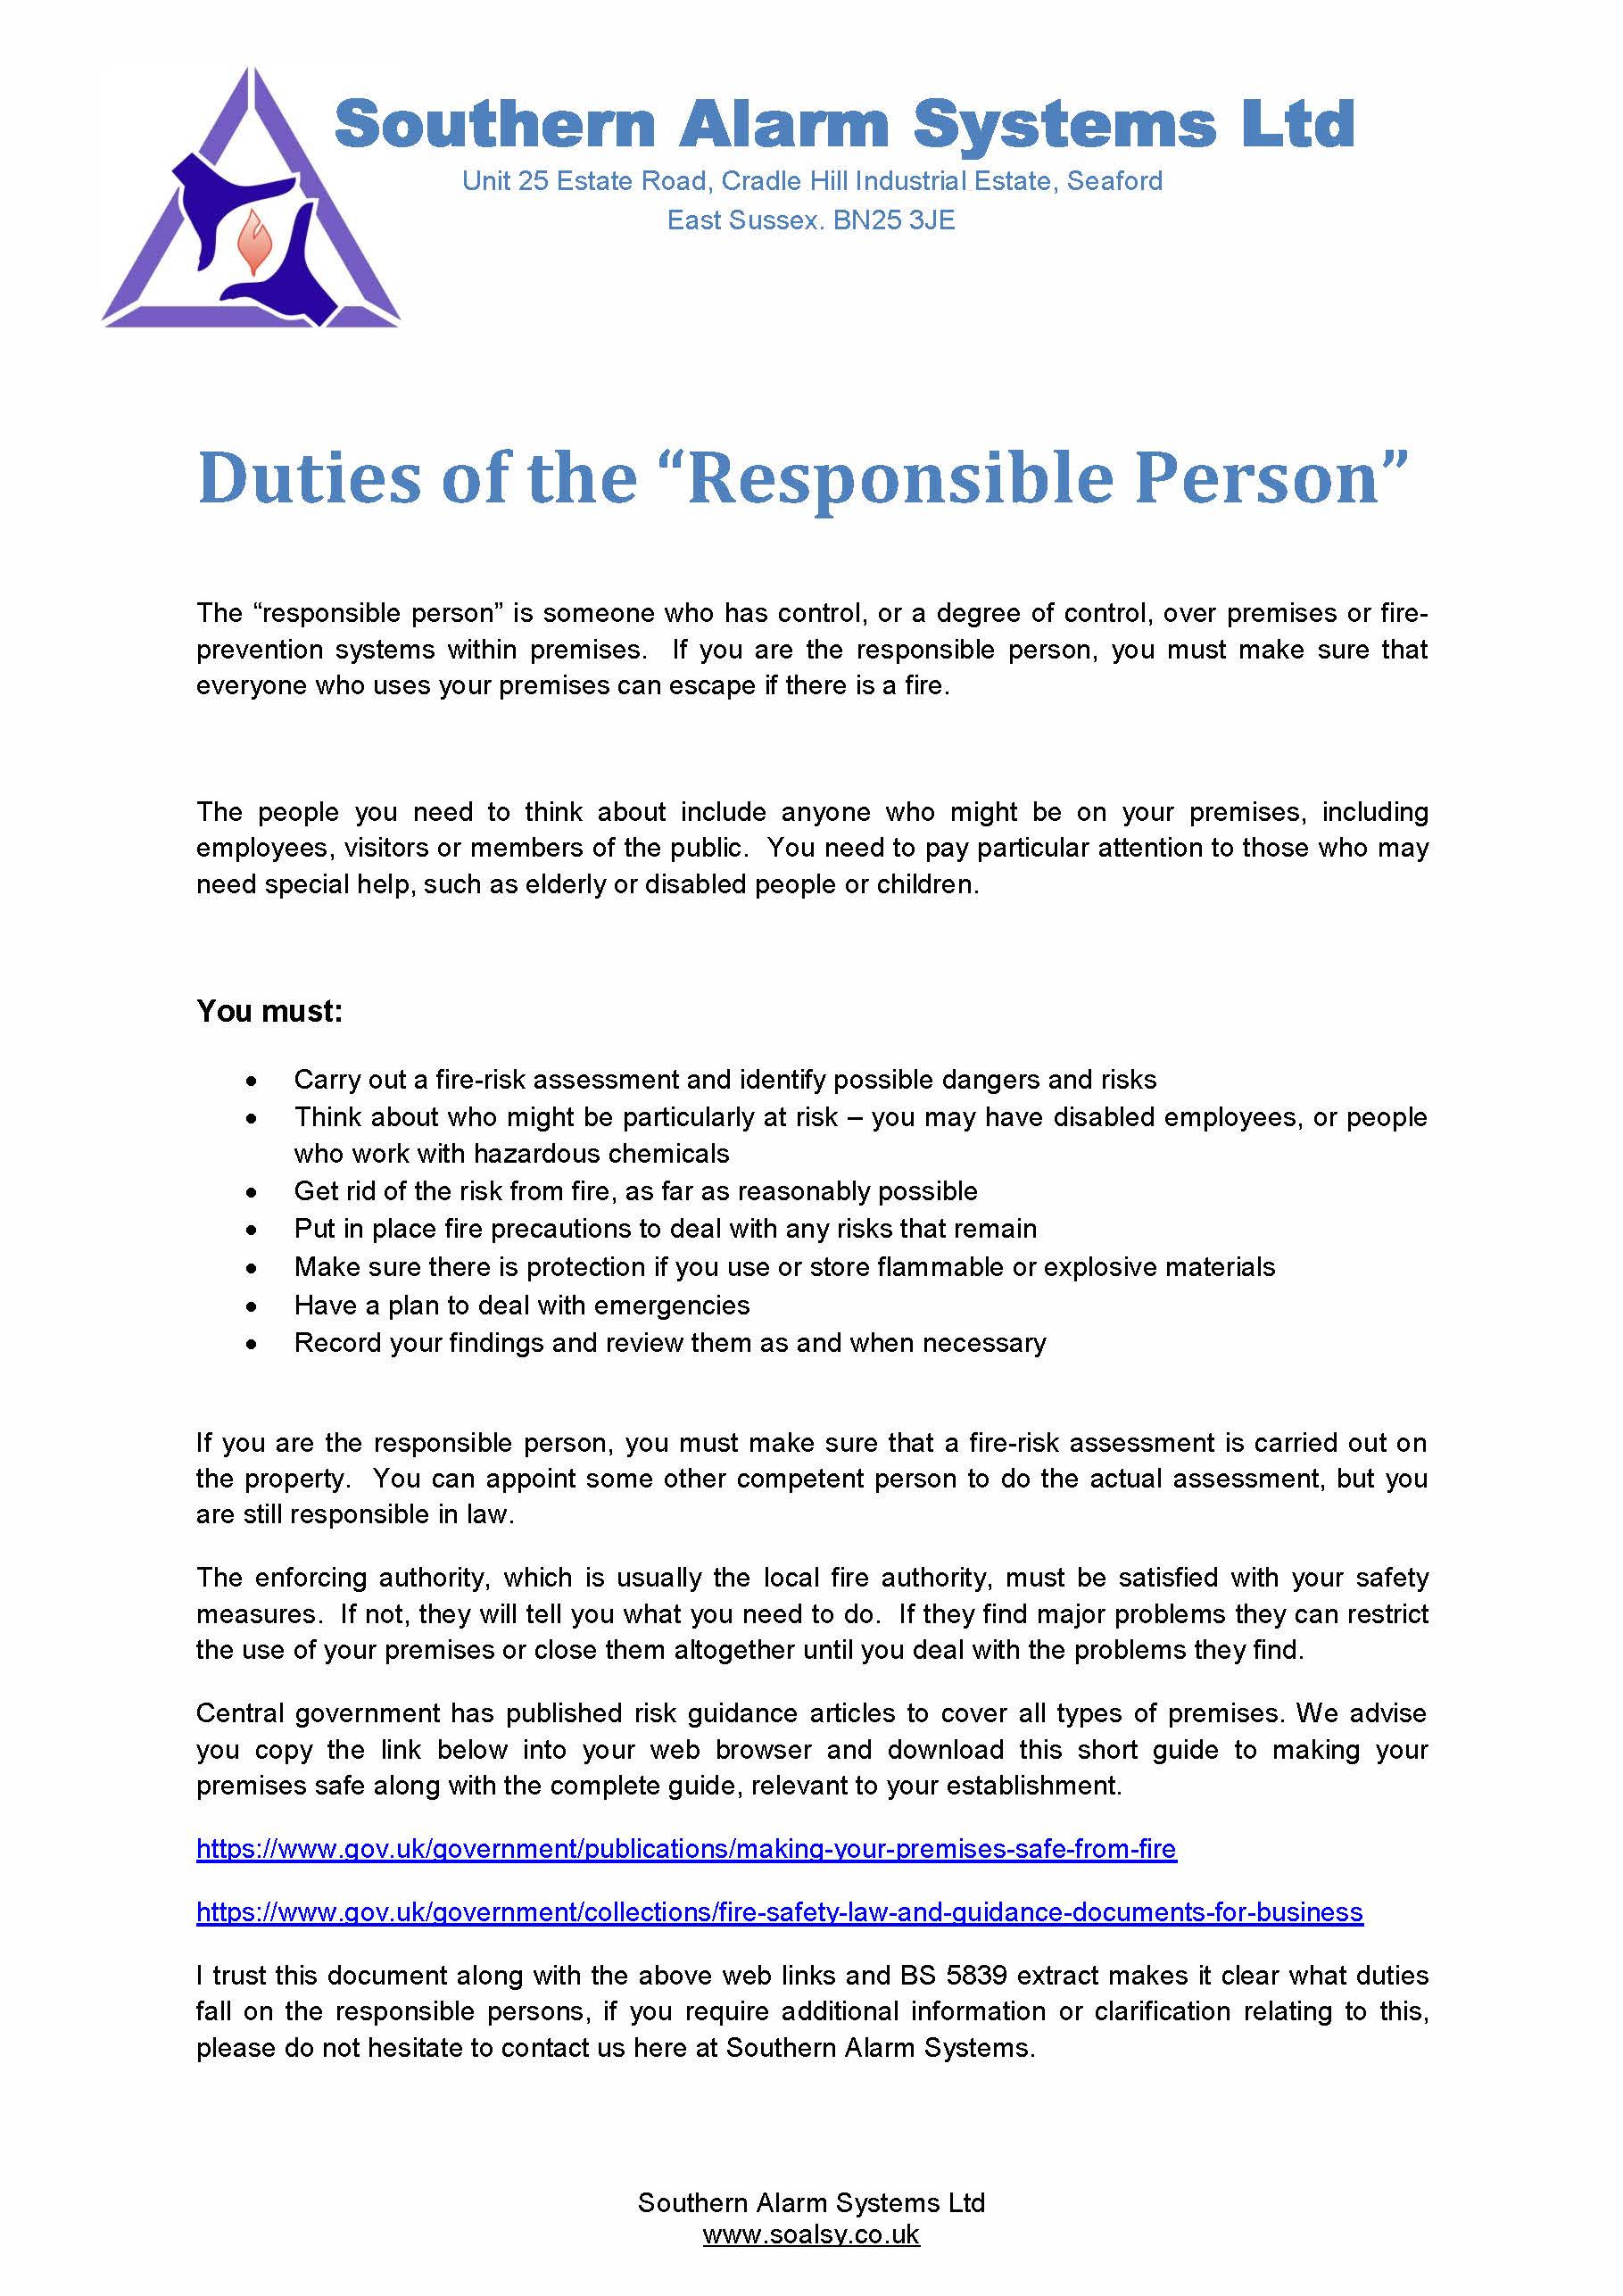 Duties of the Responsible Person